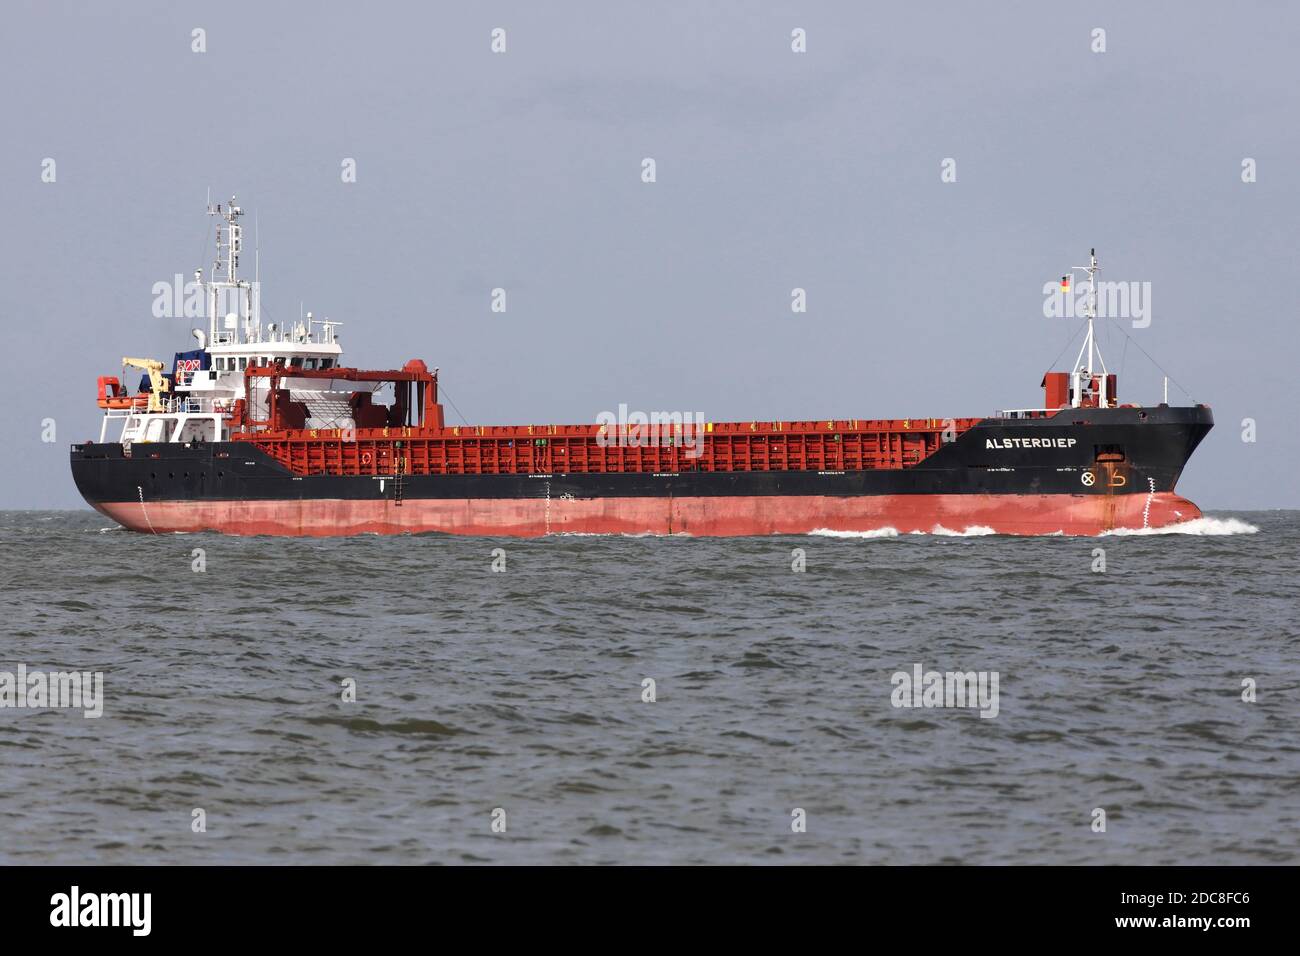 The cargo ship Alsterdiep will pass the Kugelbake in Cuxhaven on August 22, 2020 and will continue towards Hamburg. Stock Photo